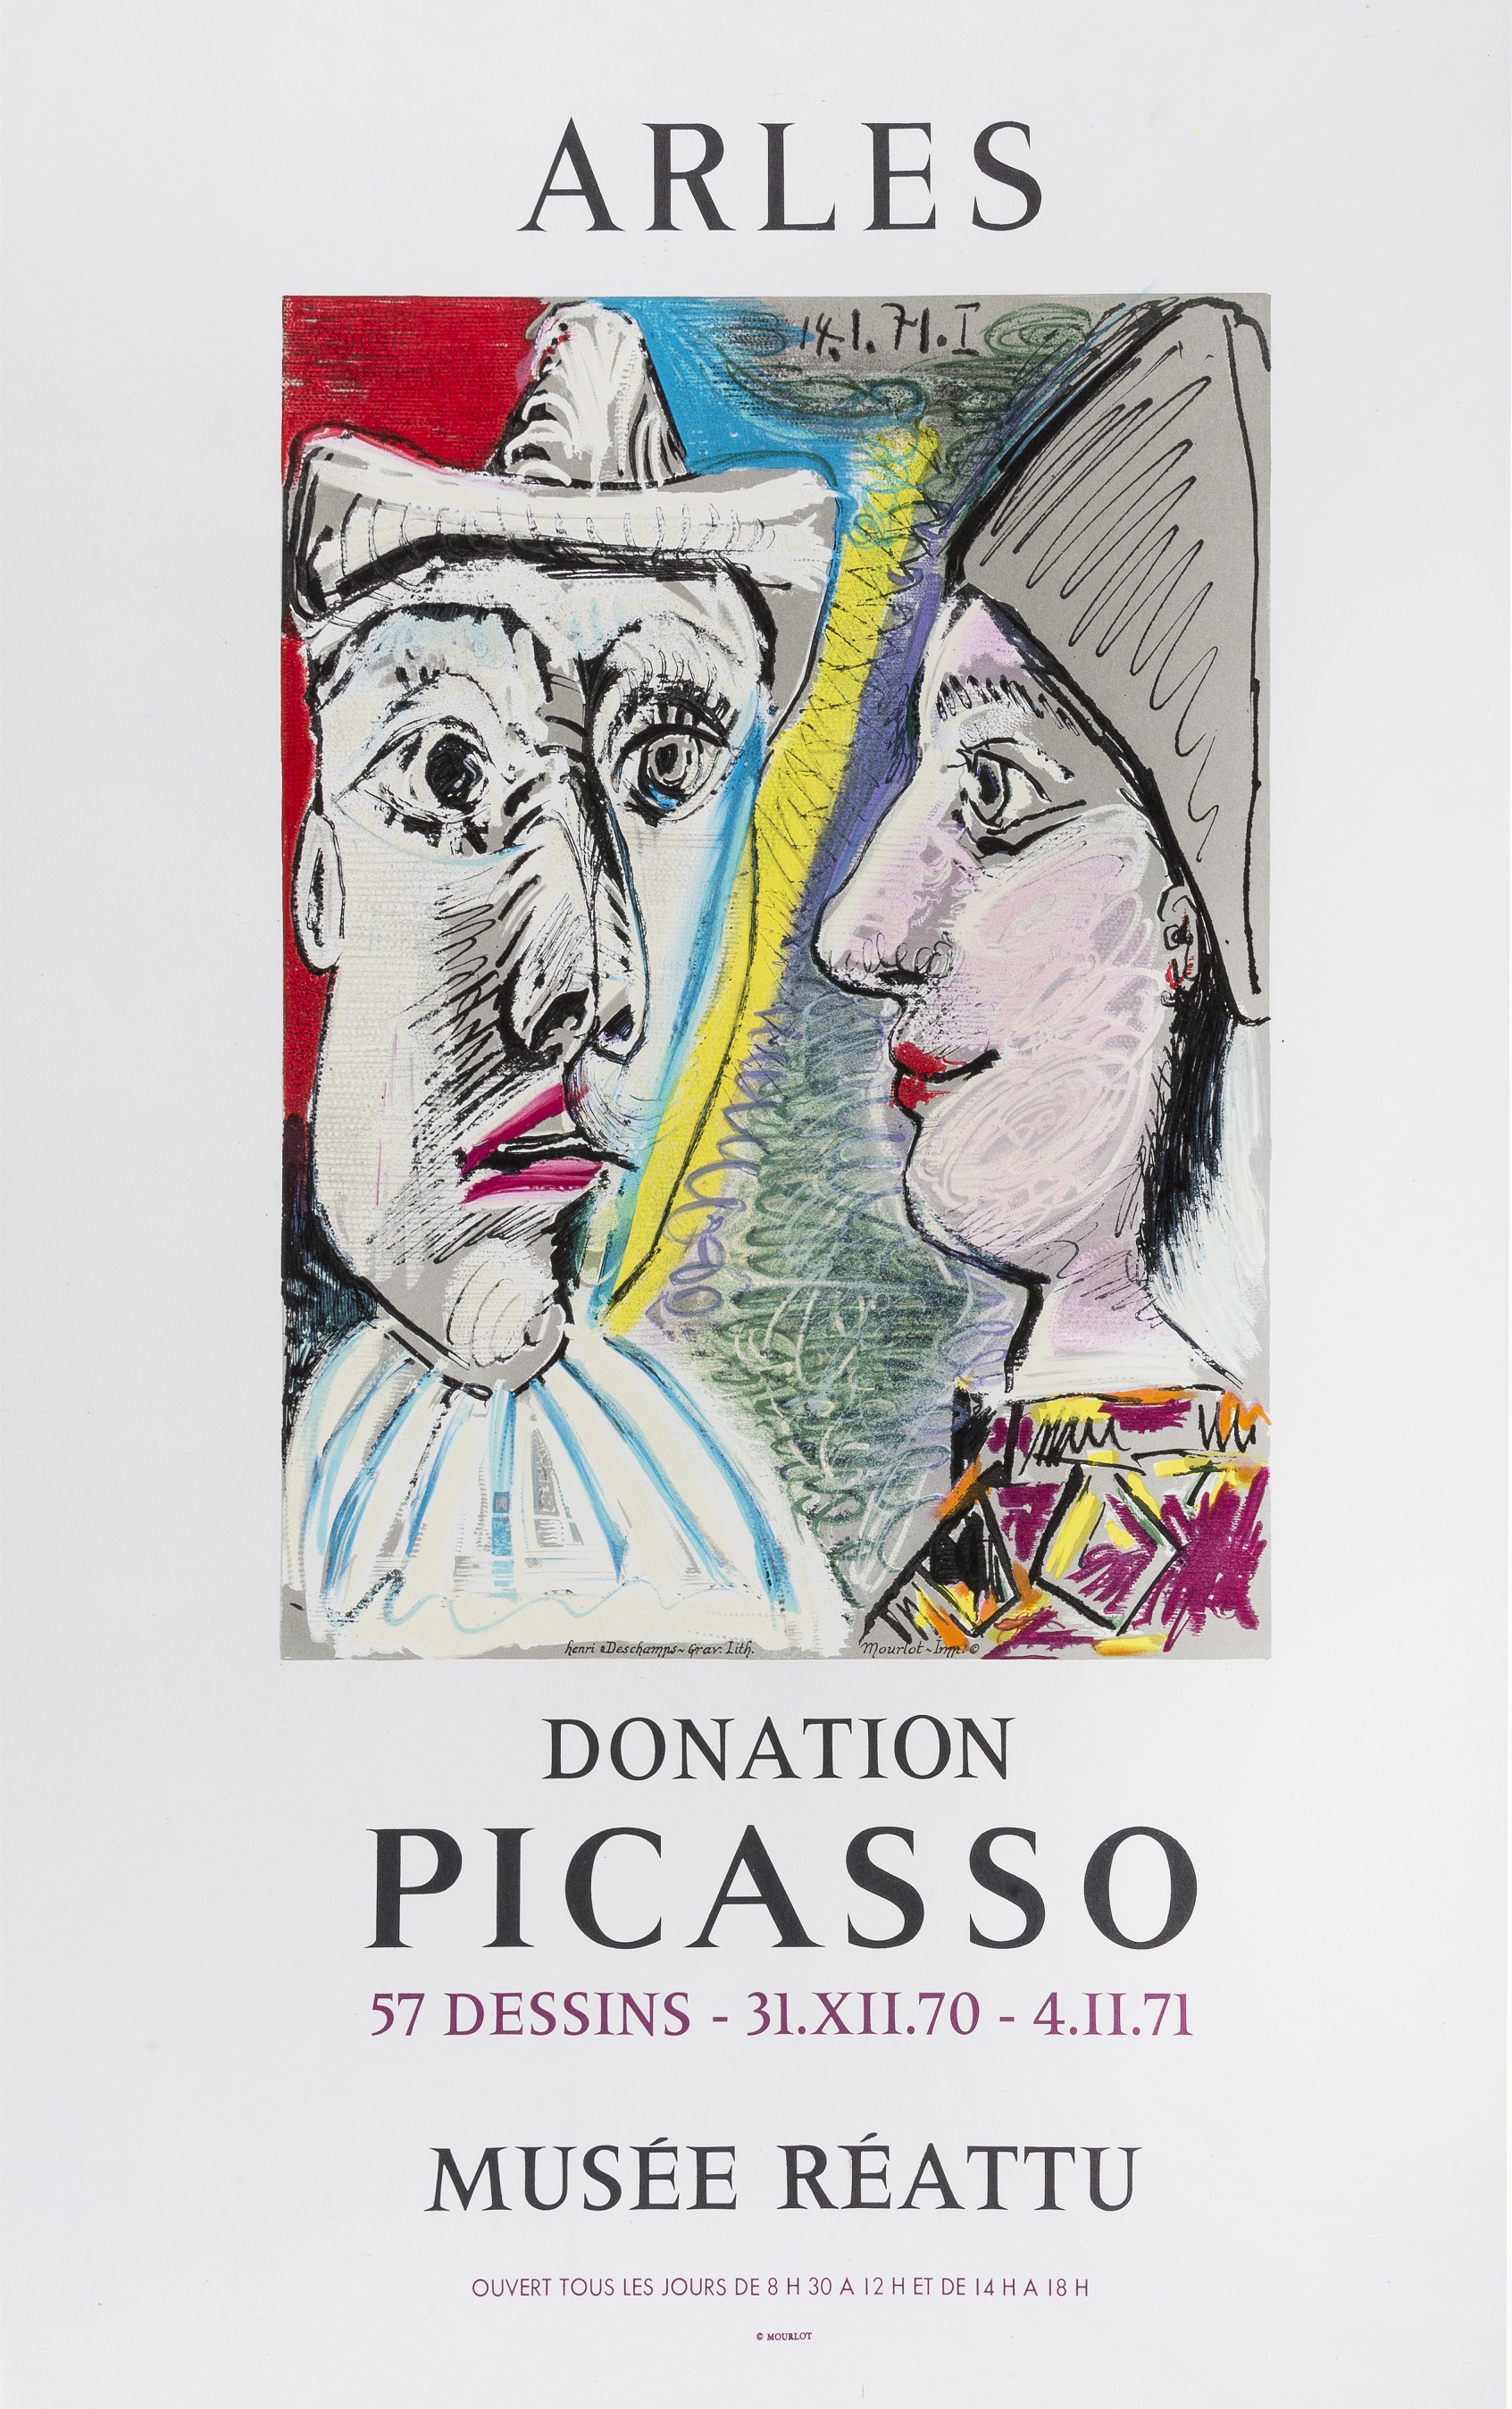 Pablo Picasso (1881-1973)(after) Arles Donation Picasso